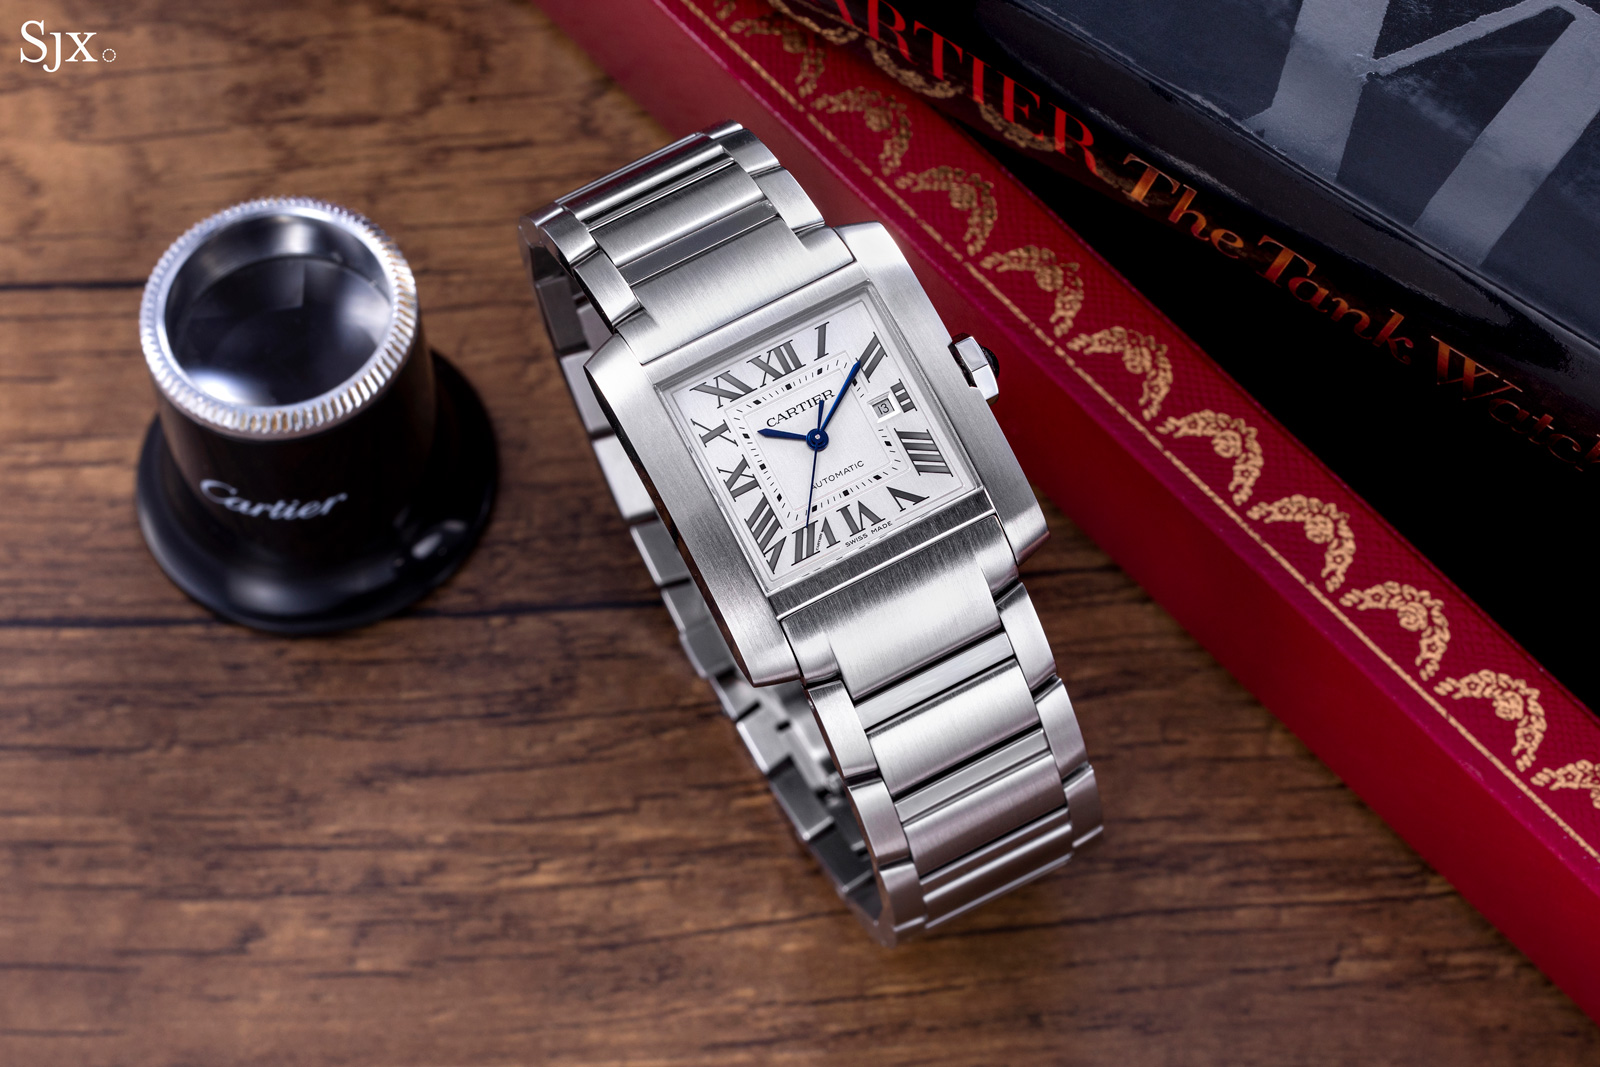 Hands On: The Cartier Tank Francaise